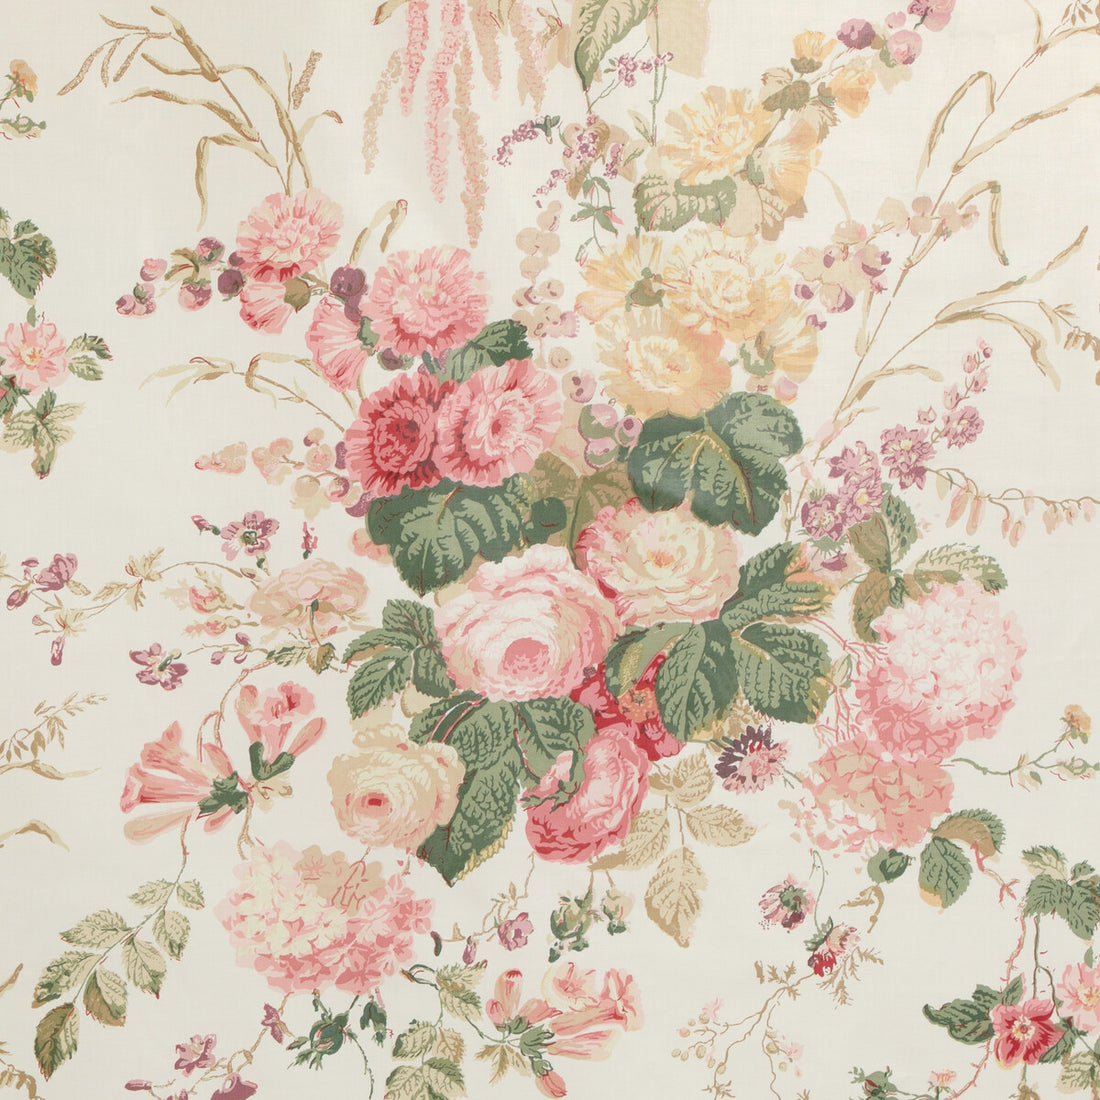 Floral Bouquet fabric in pink/ivy color - pattern 2023120.73.0 - by Lee Jofa in the Lee Jofa 200 collection